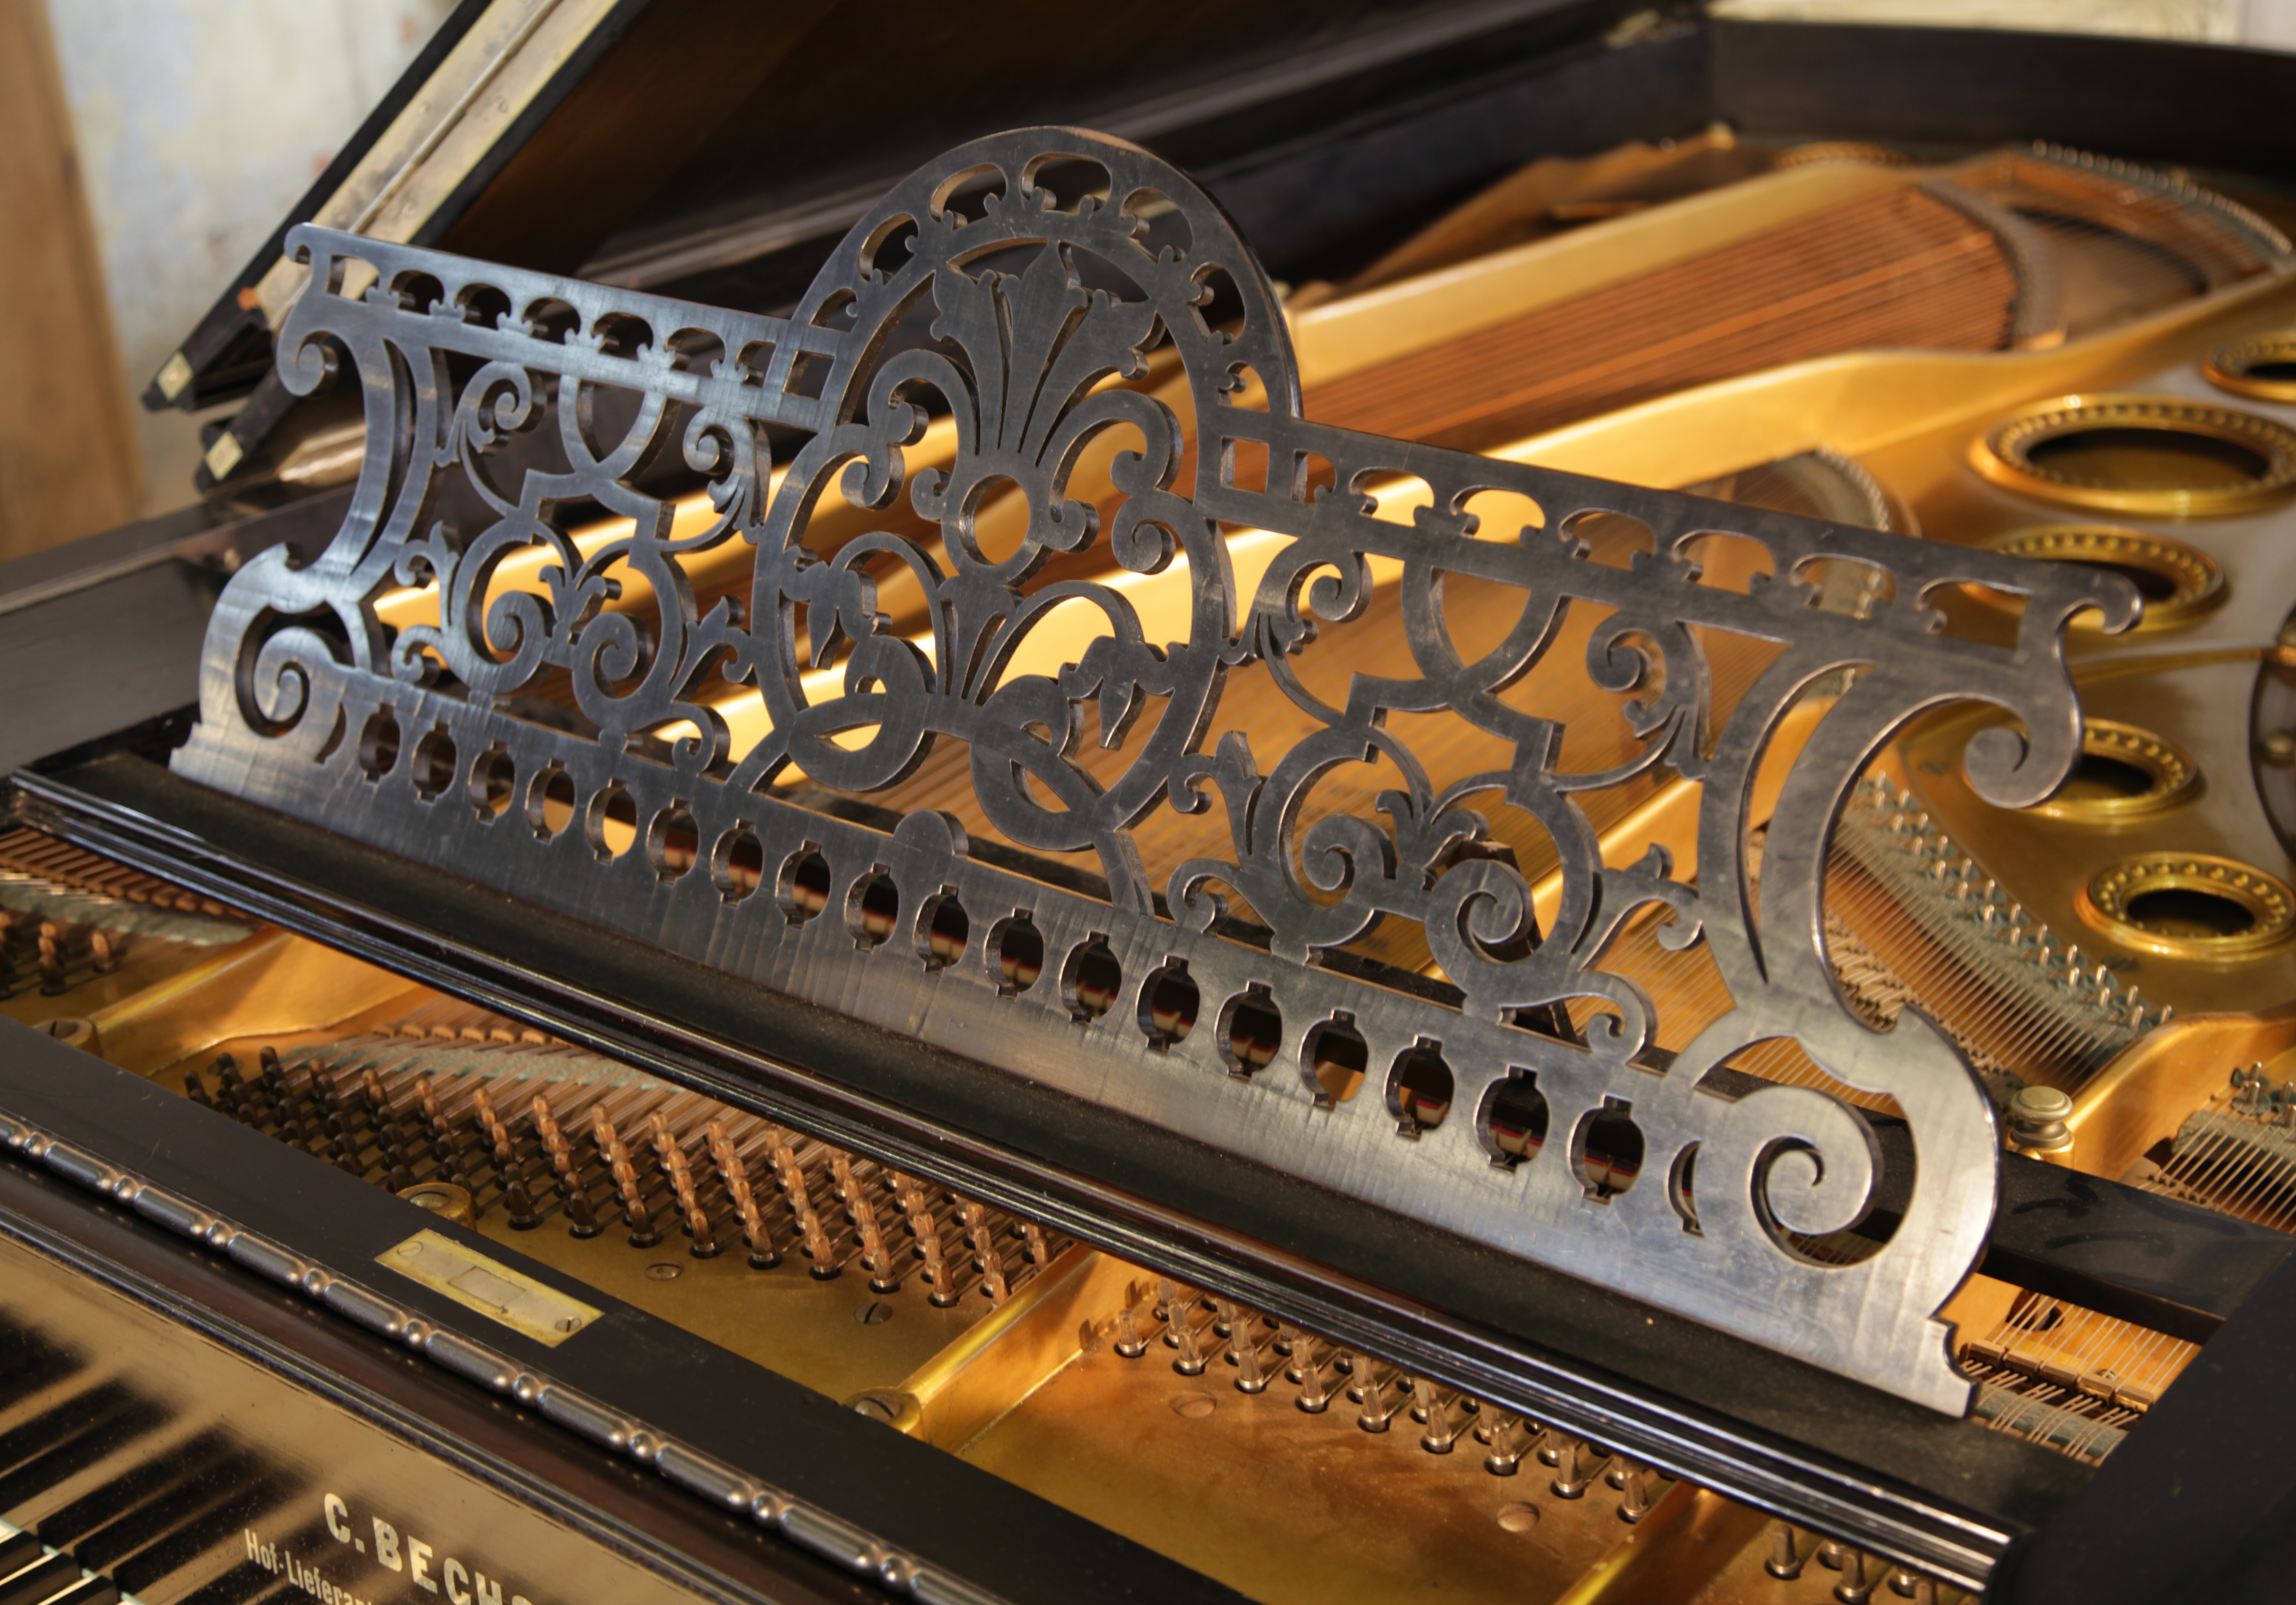 Bechstein Model C  Grand Piano for sale. We are looking for Steinway pianos any age or condition.